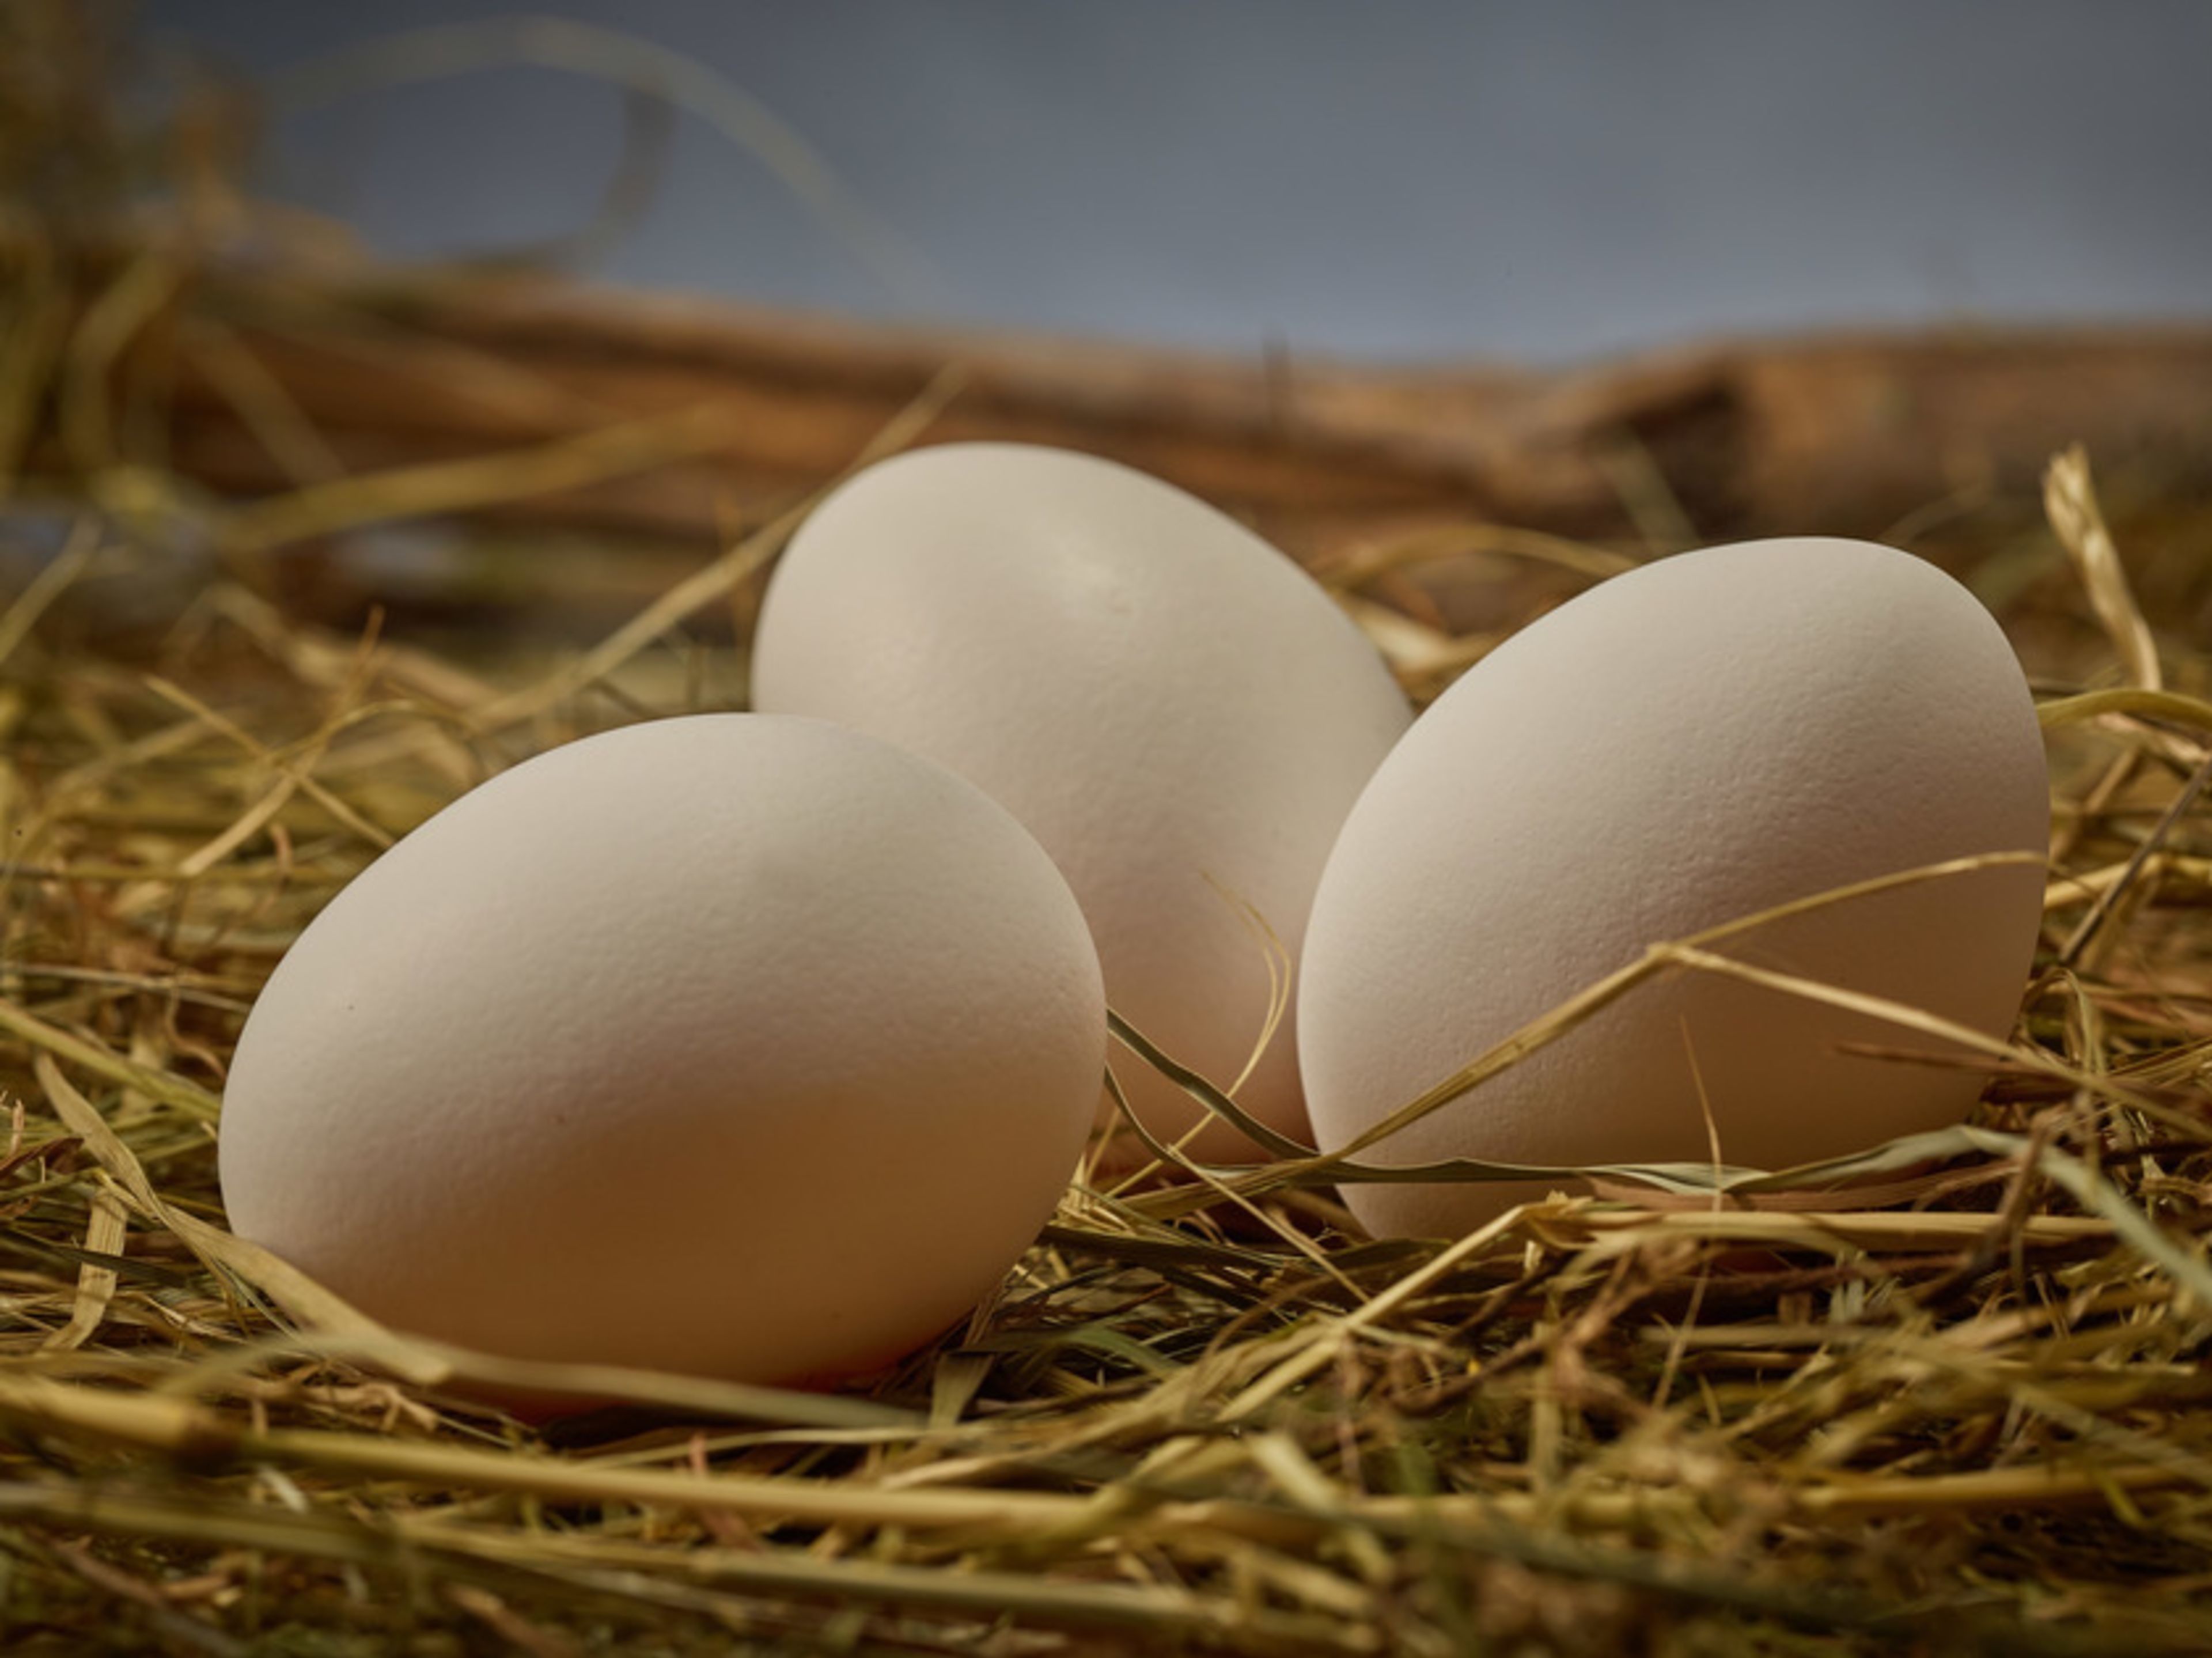 The family business was founded in 1976. It raises its own laying hens and packs their eggs as well as those from other local hen farms, Valais, Switzerland.